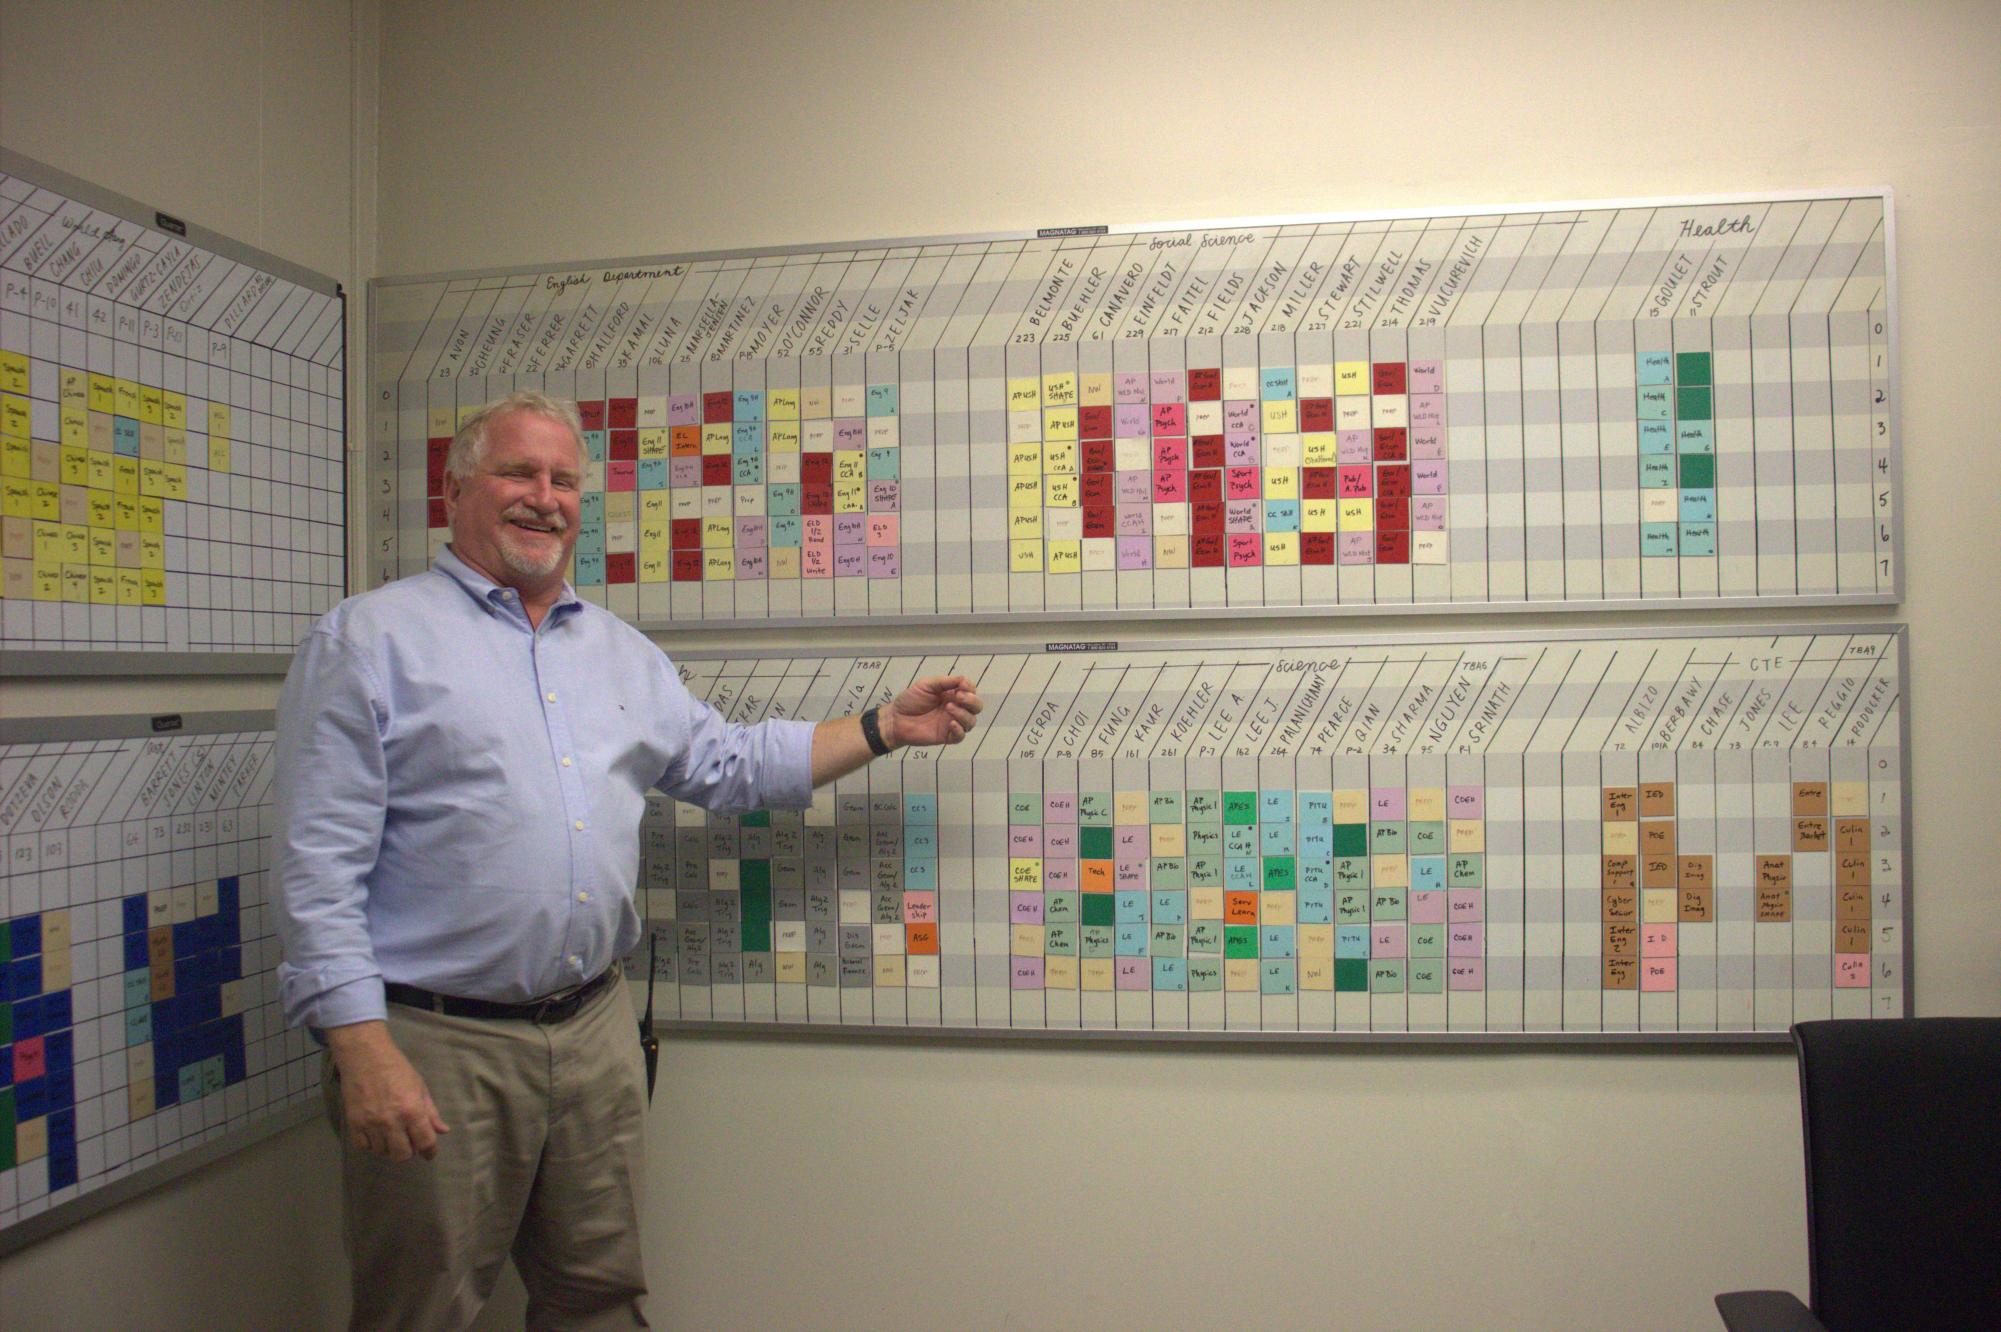 Principal Hicks in front of the Master Schedule, complete with every teacher’s name, classes, family classes, etc., organized by departments. 